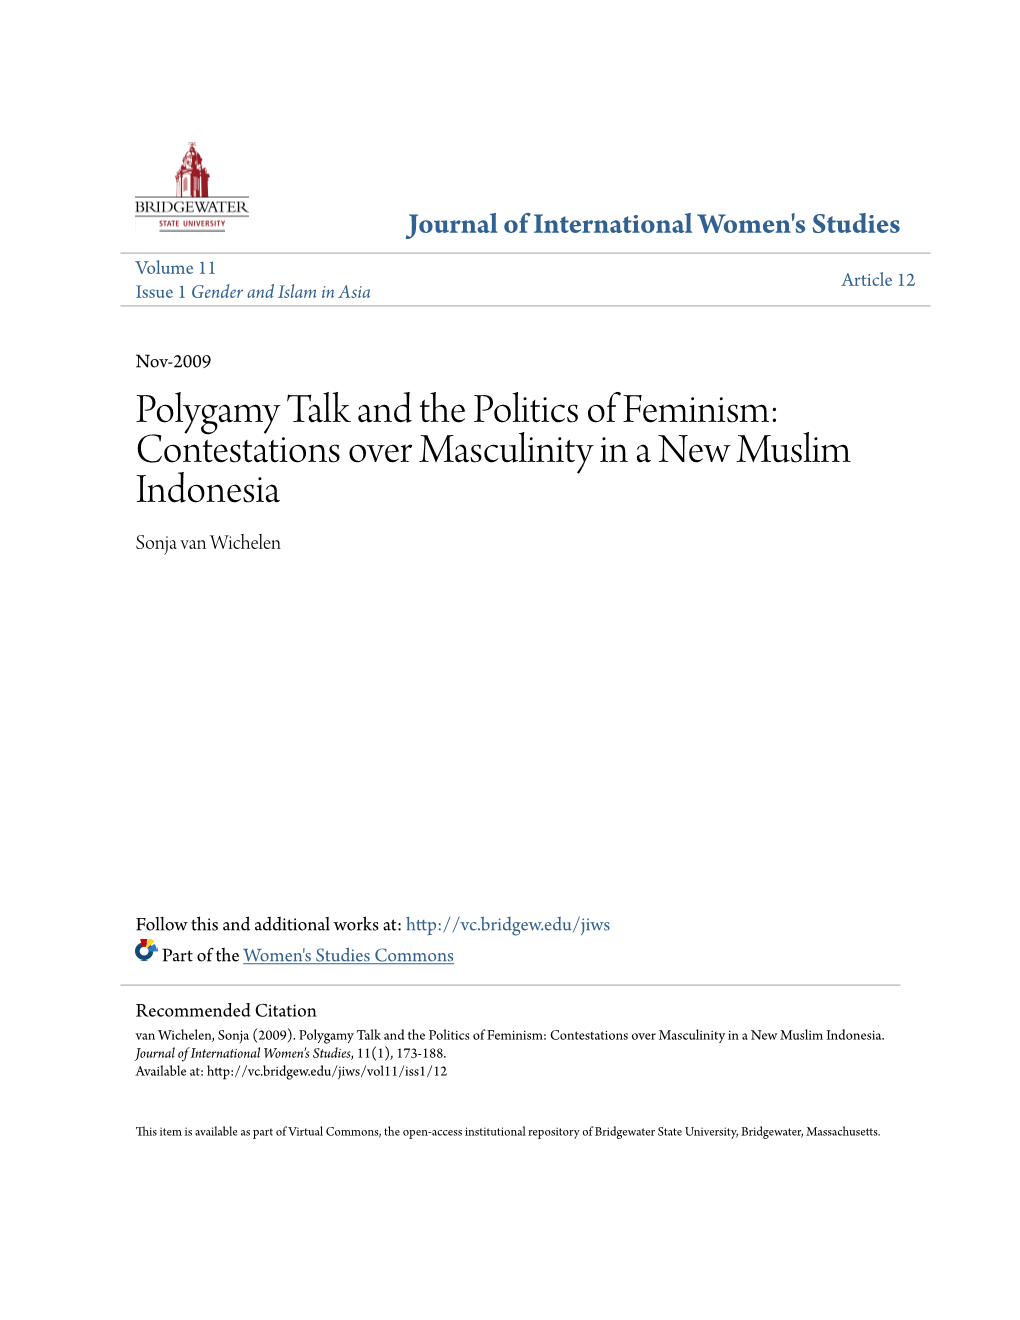 Polygamy Talk and the Politics of Feminism: Contestations Over Masculinity in a New Muslim Indonesia Sonja Van Wichelen